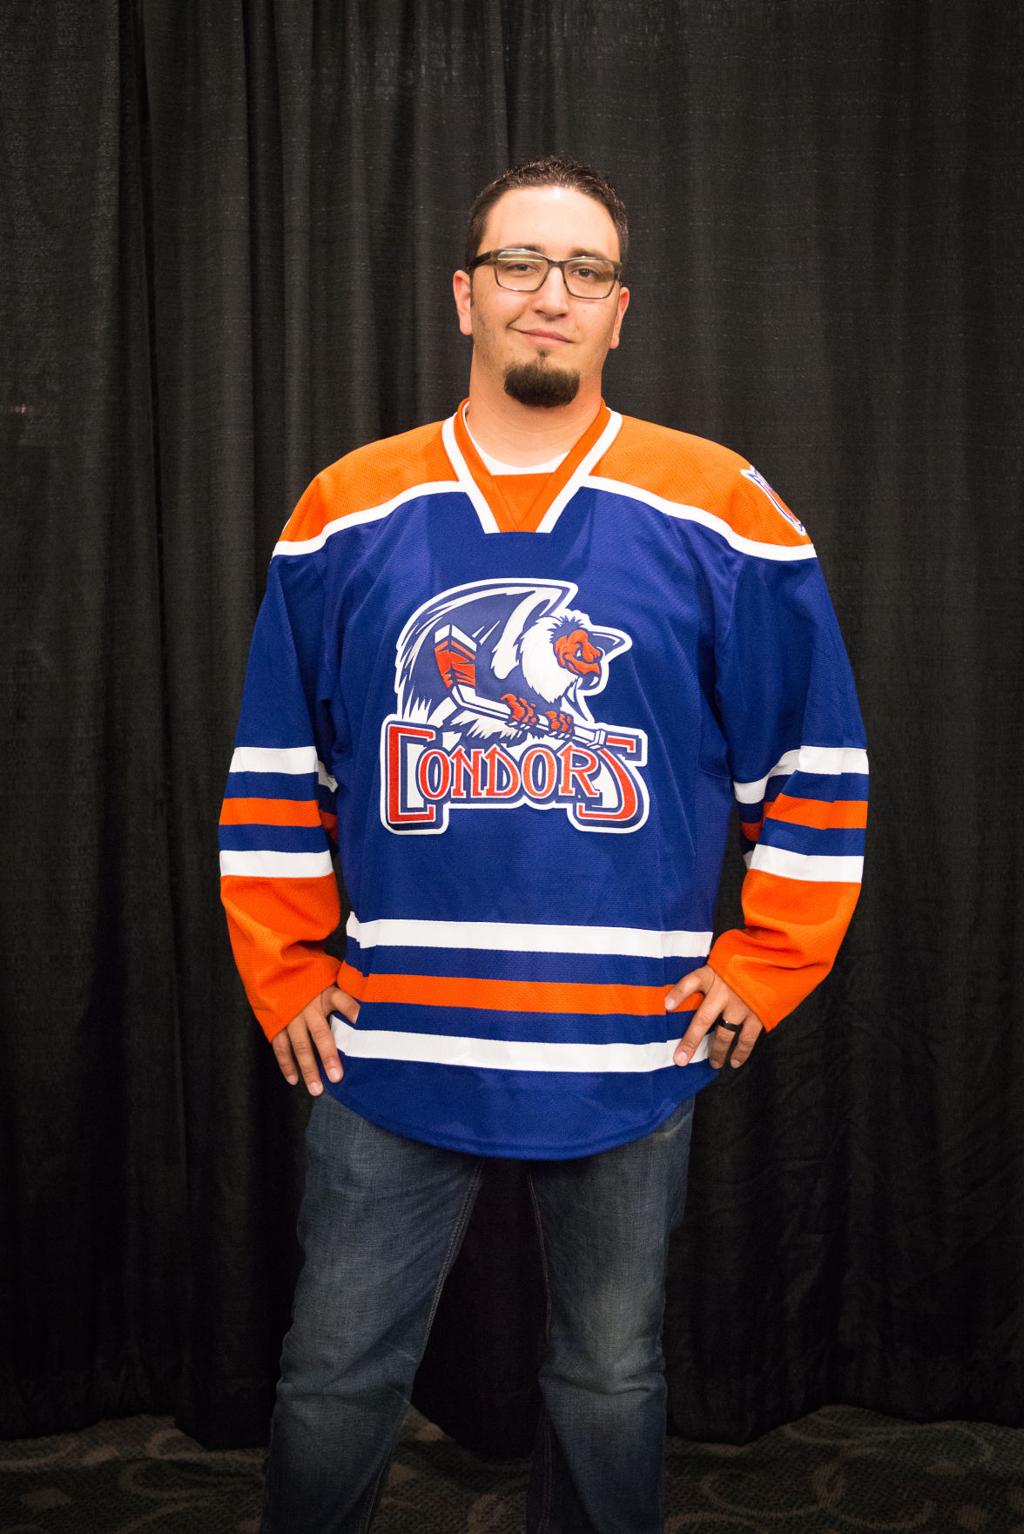 New Bakersfield Condors jerseys have metallic wings, are 'most expensive in  ECHL history' (Photo)